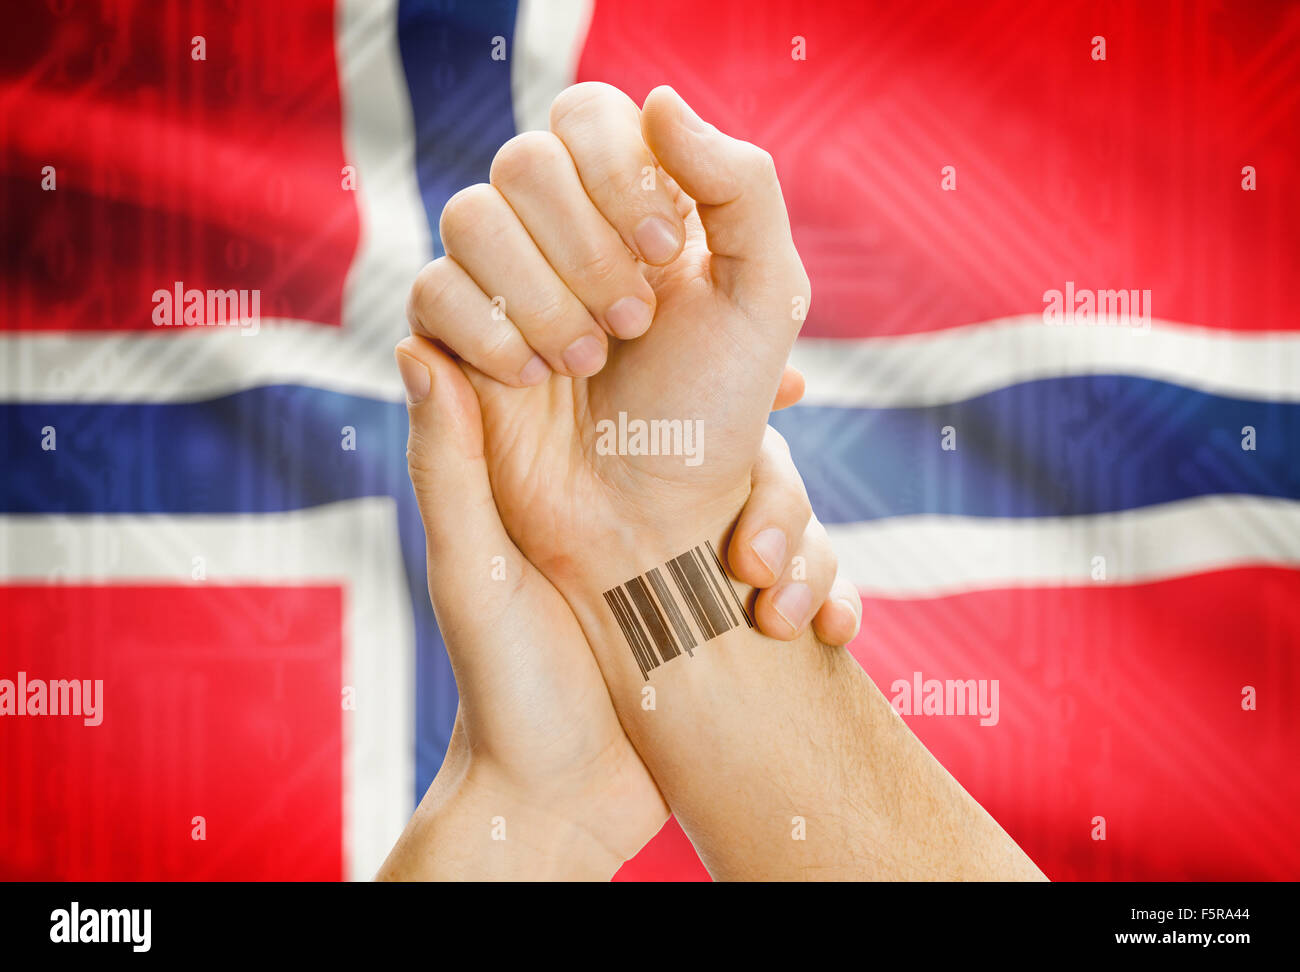 Barcode ID number on wrist of a human and national flag on background - Norway Stock Photo